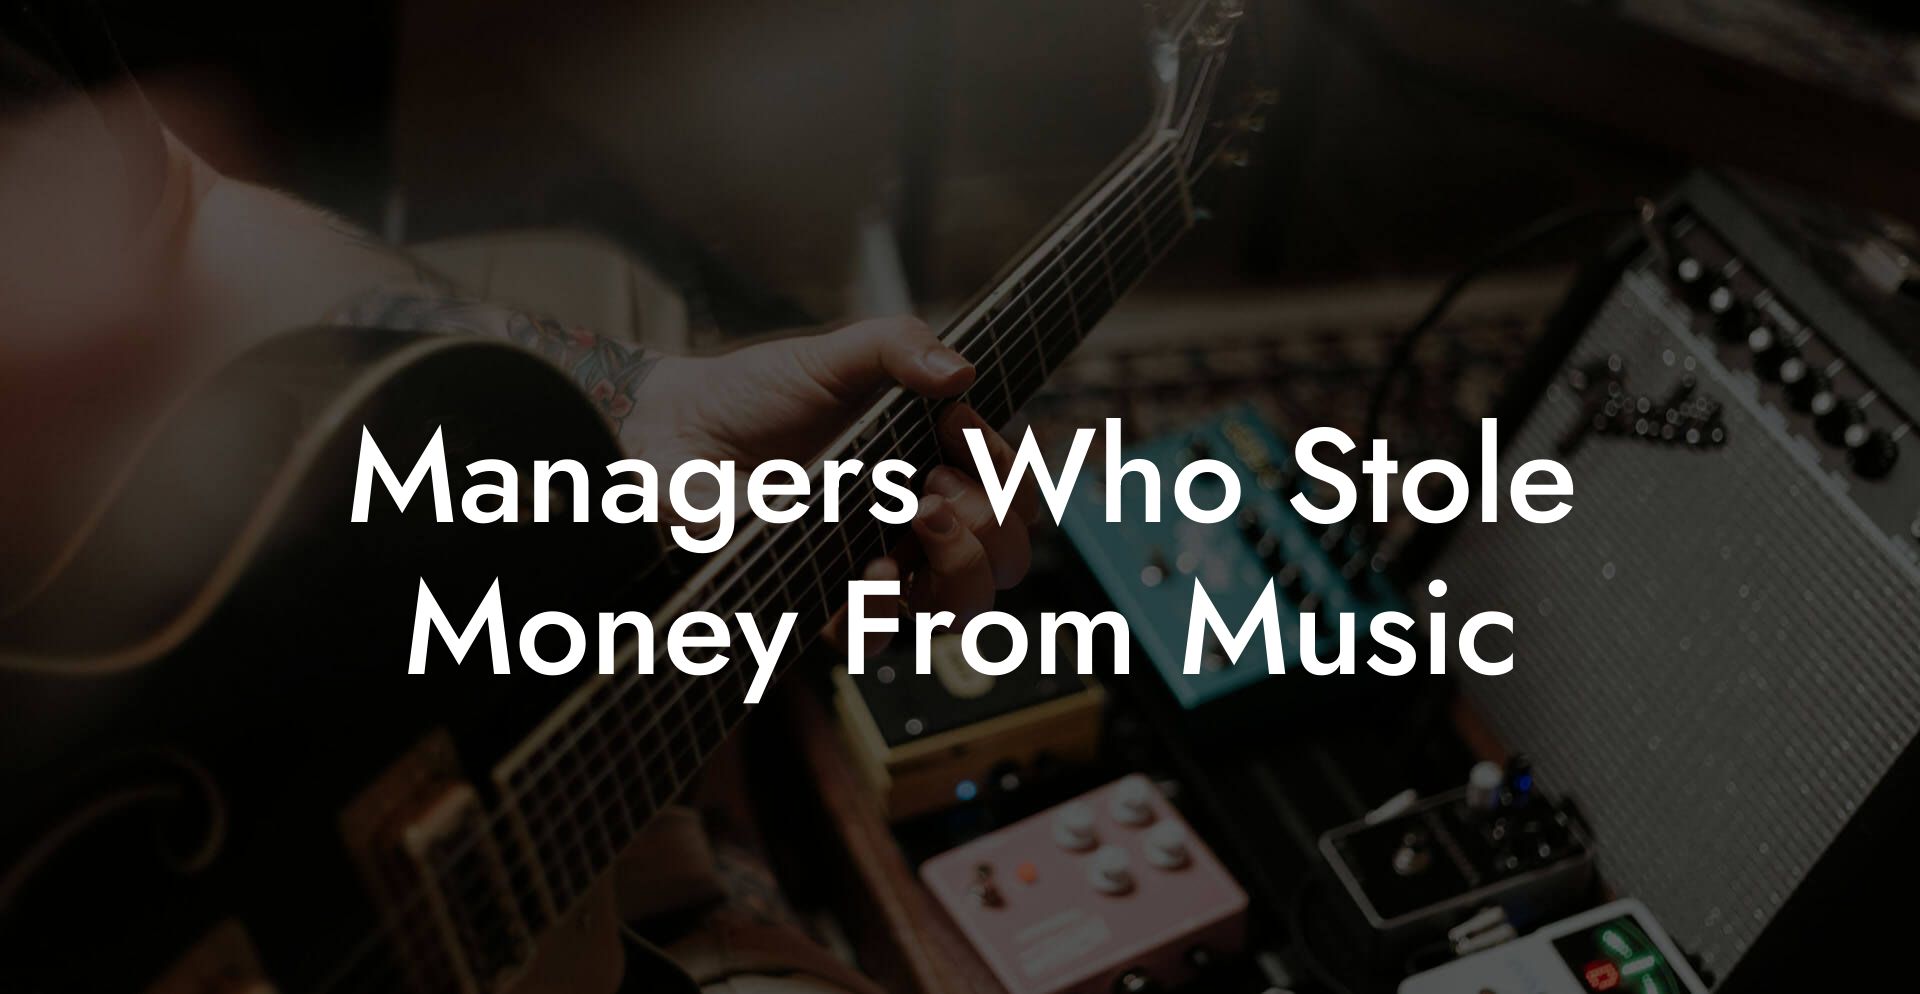 Managers Who Stole Money From Music